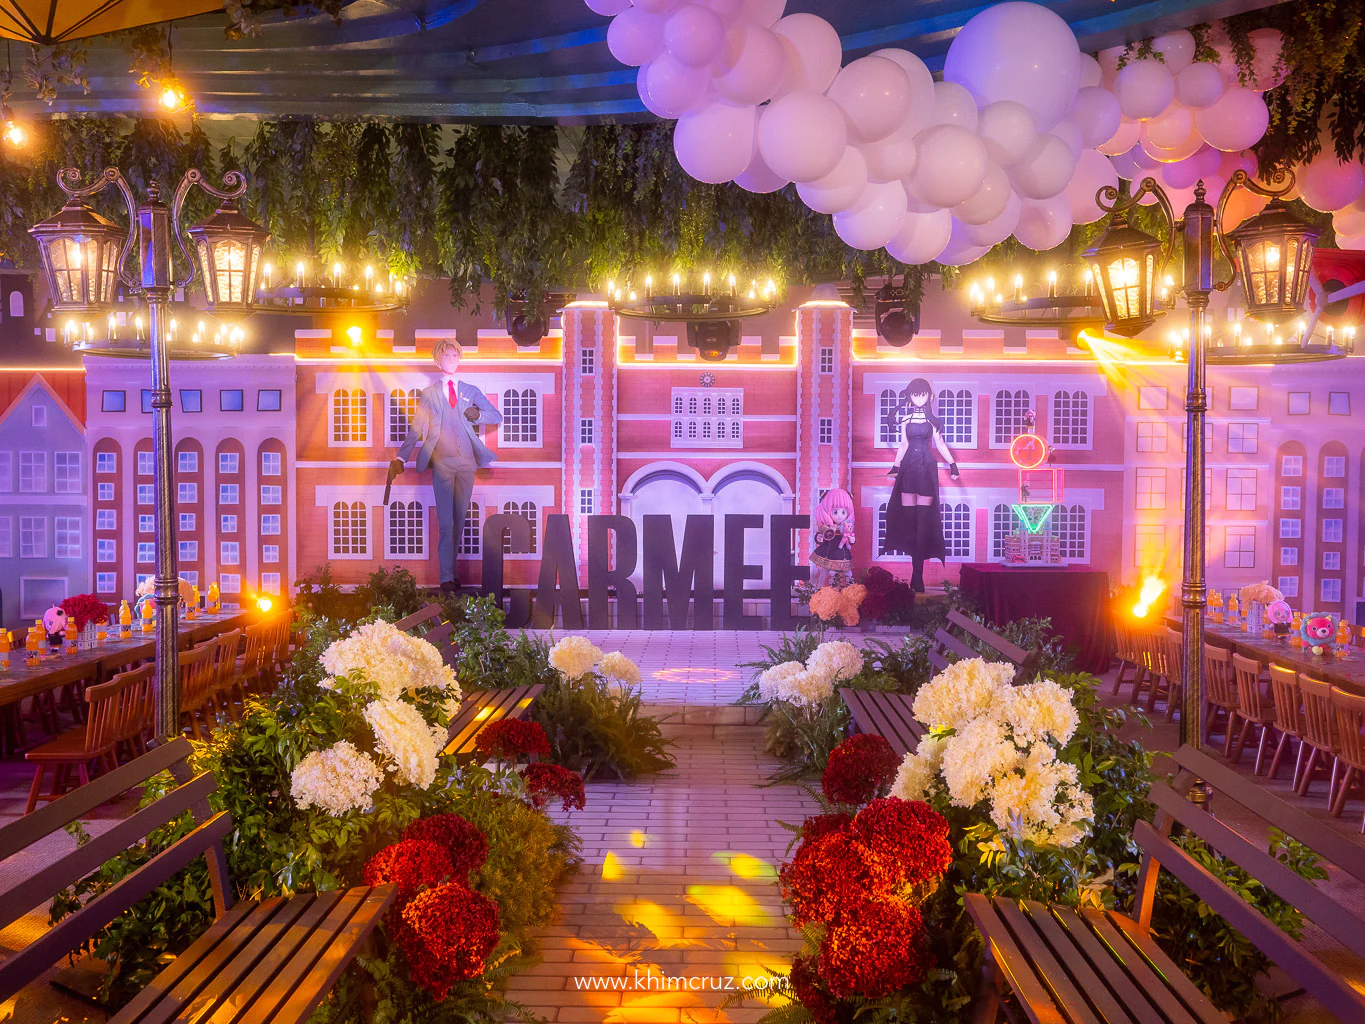 spy x family themed children's birthday party celebration beautiful ceiling and stage design by Khim Cruz